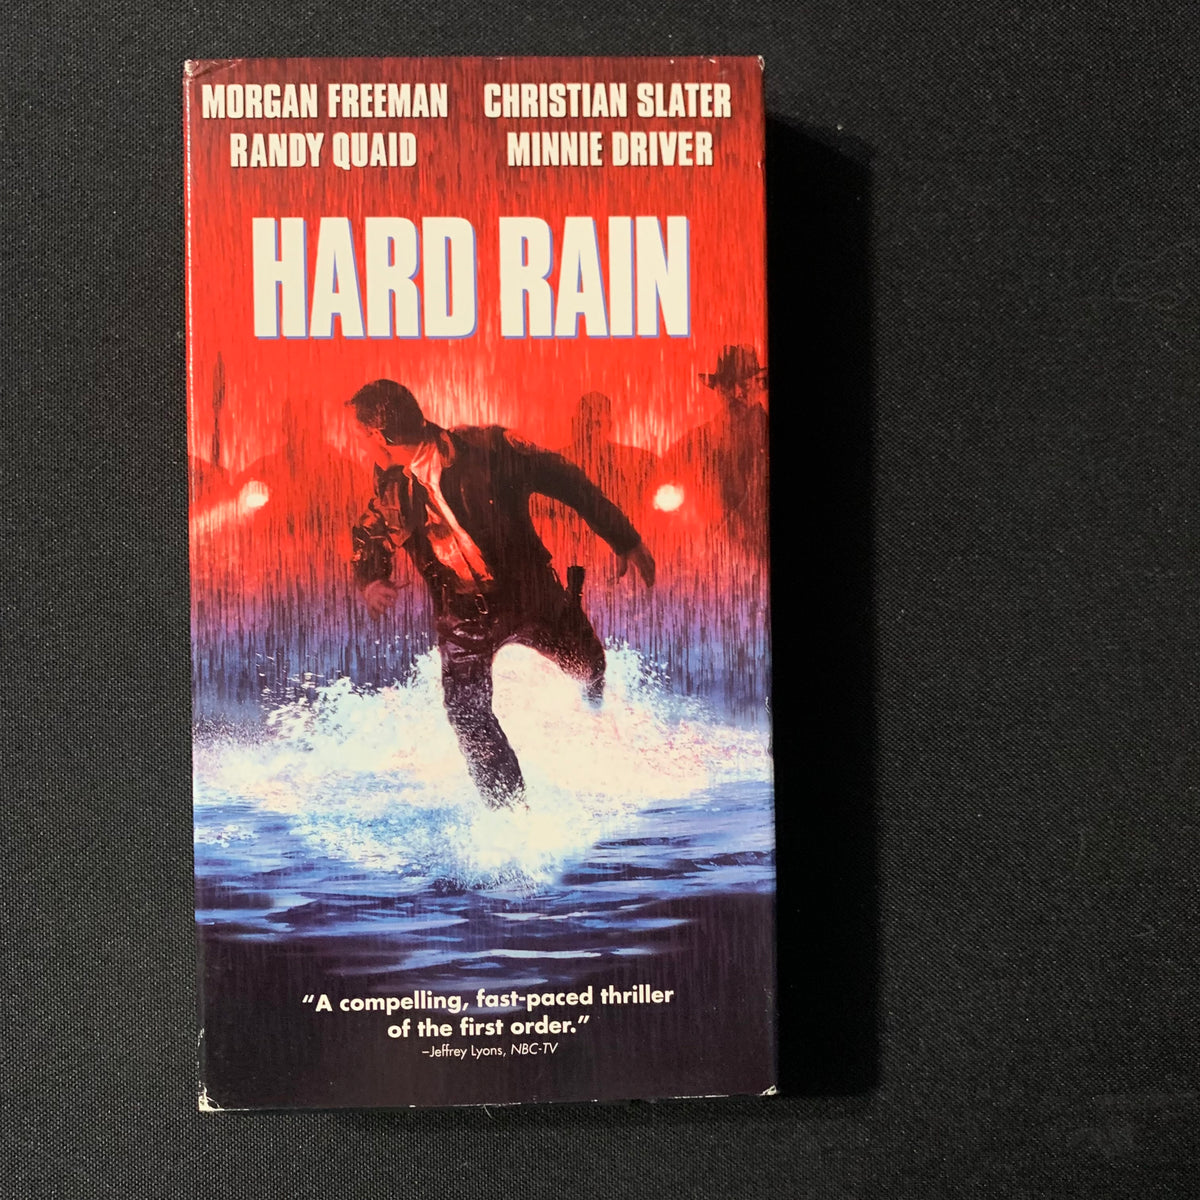 Rain Man VHS Tapes for sale